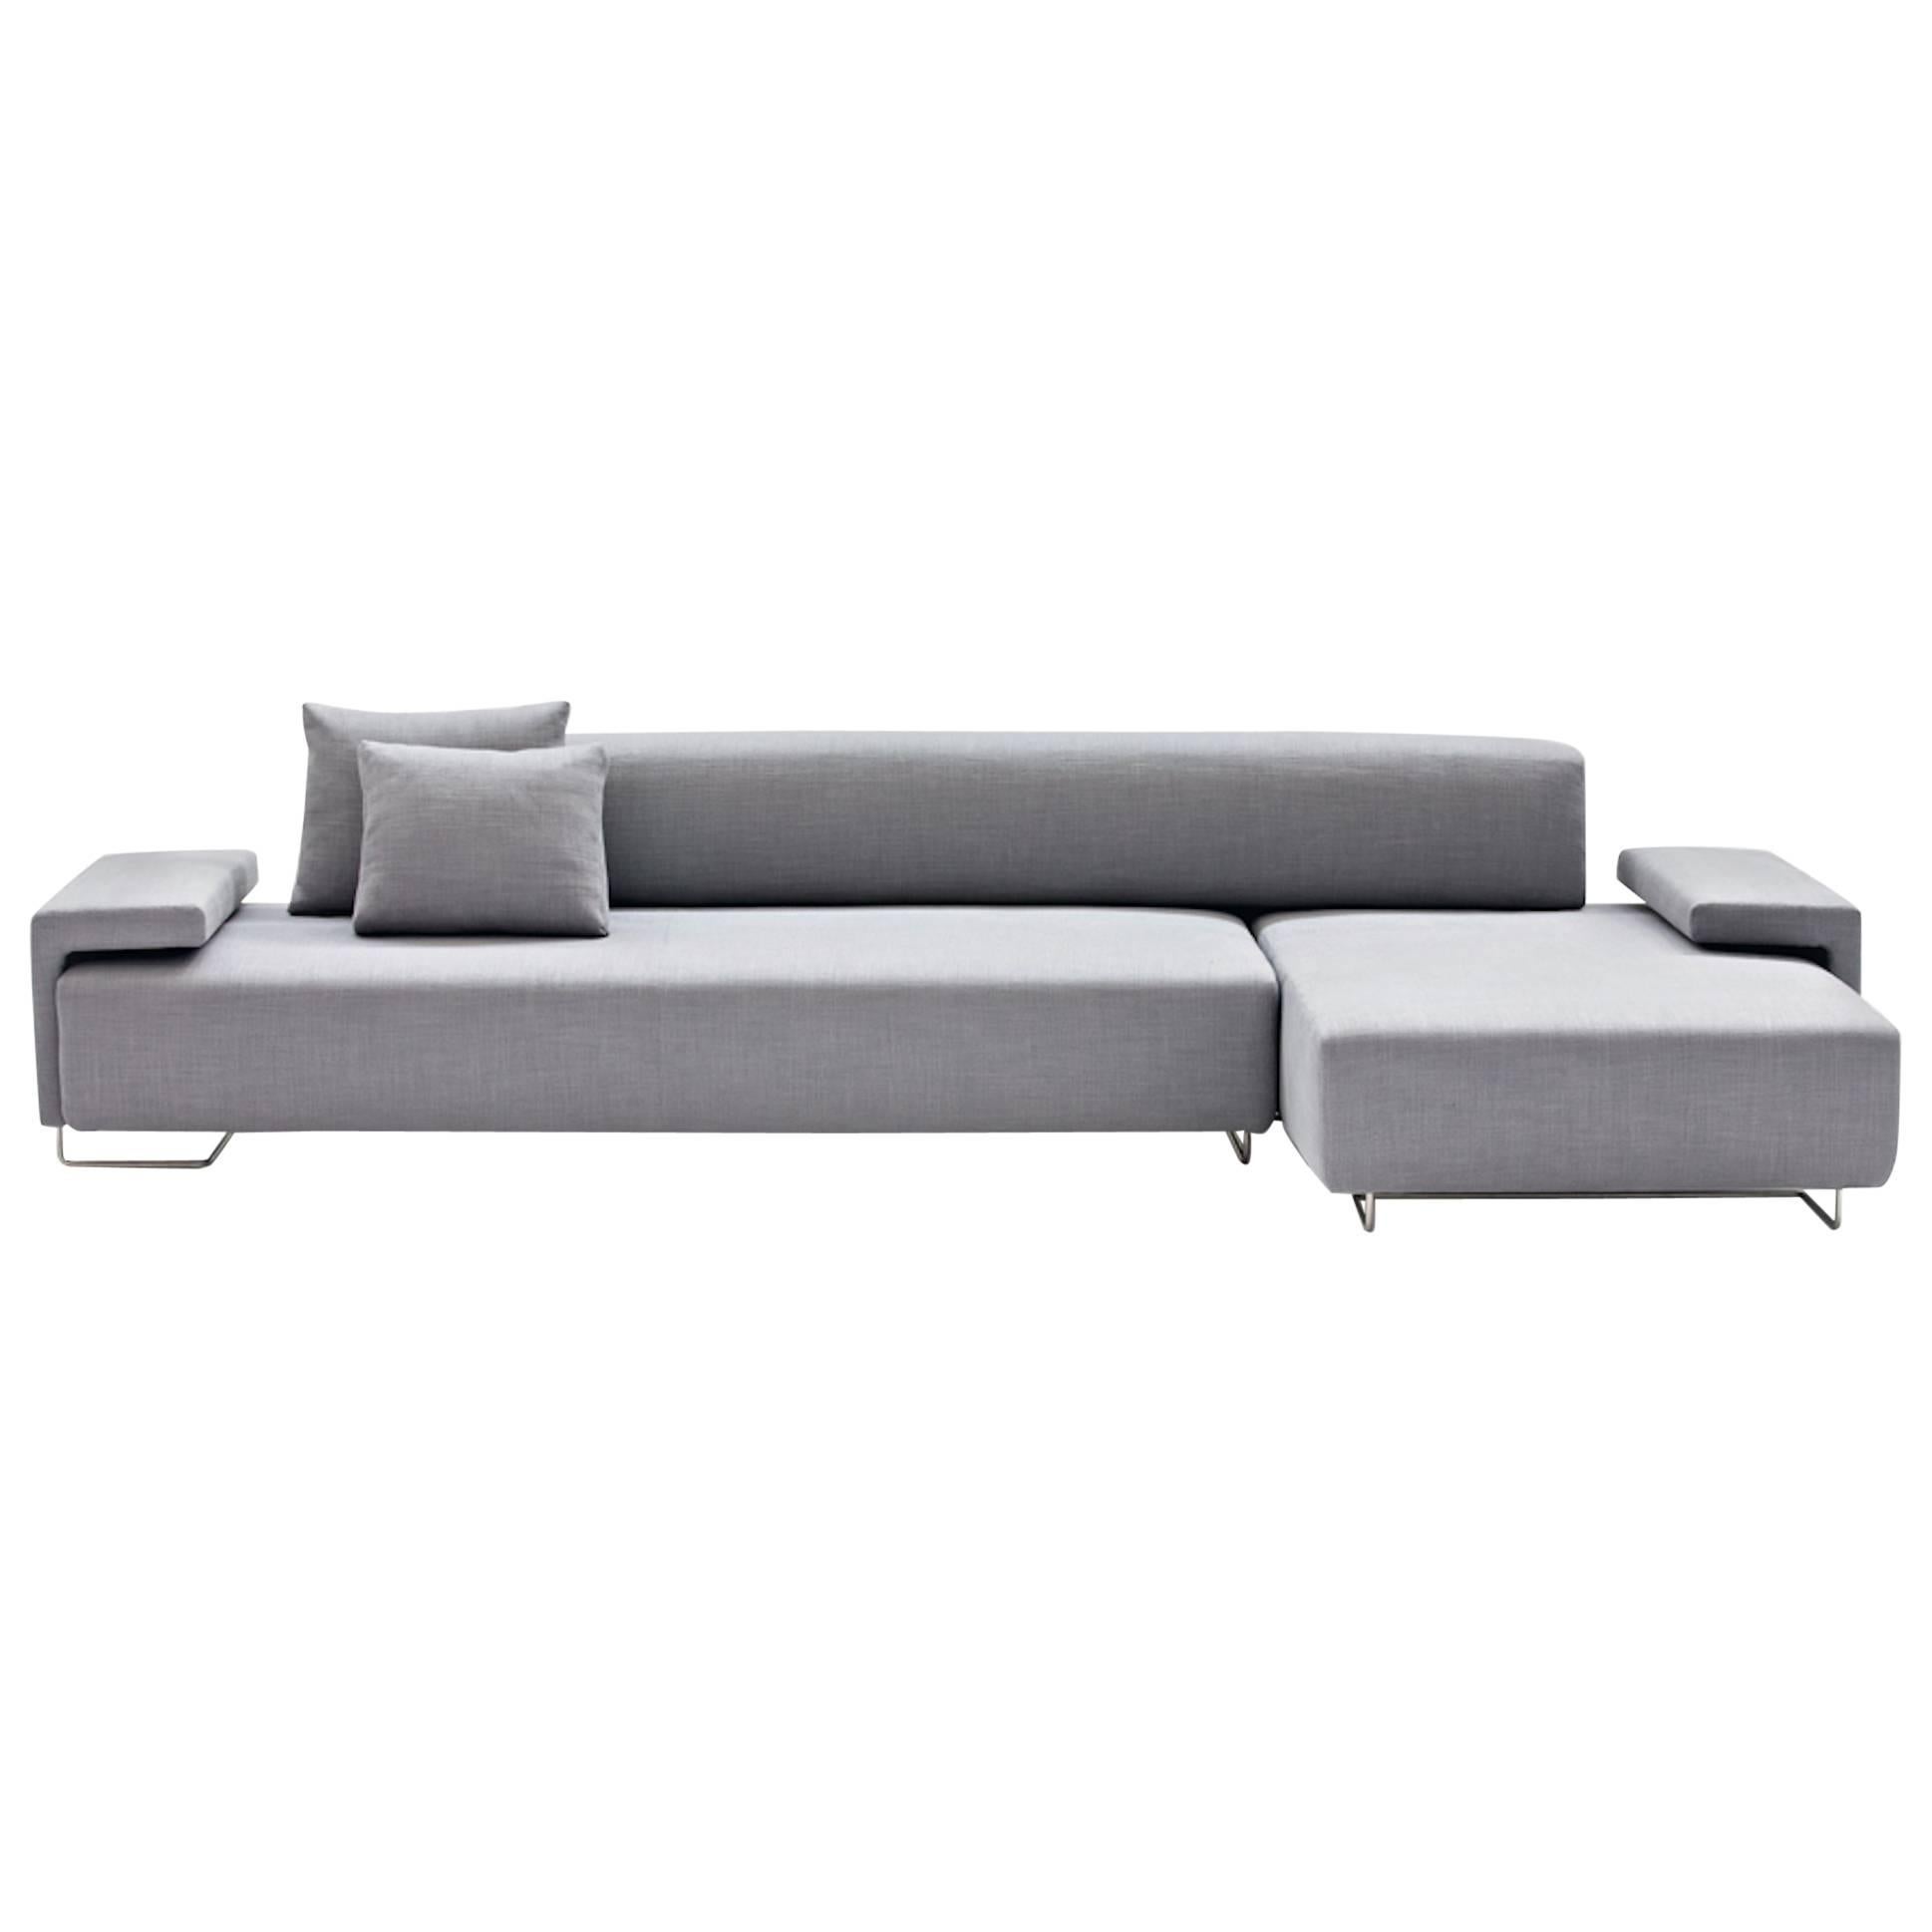 Moroso Lowland Sofa in Grey Steelcut Trio 133 Fabric in Right or Left "L" Shape For Sale